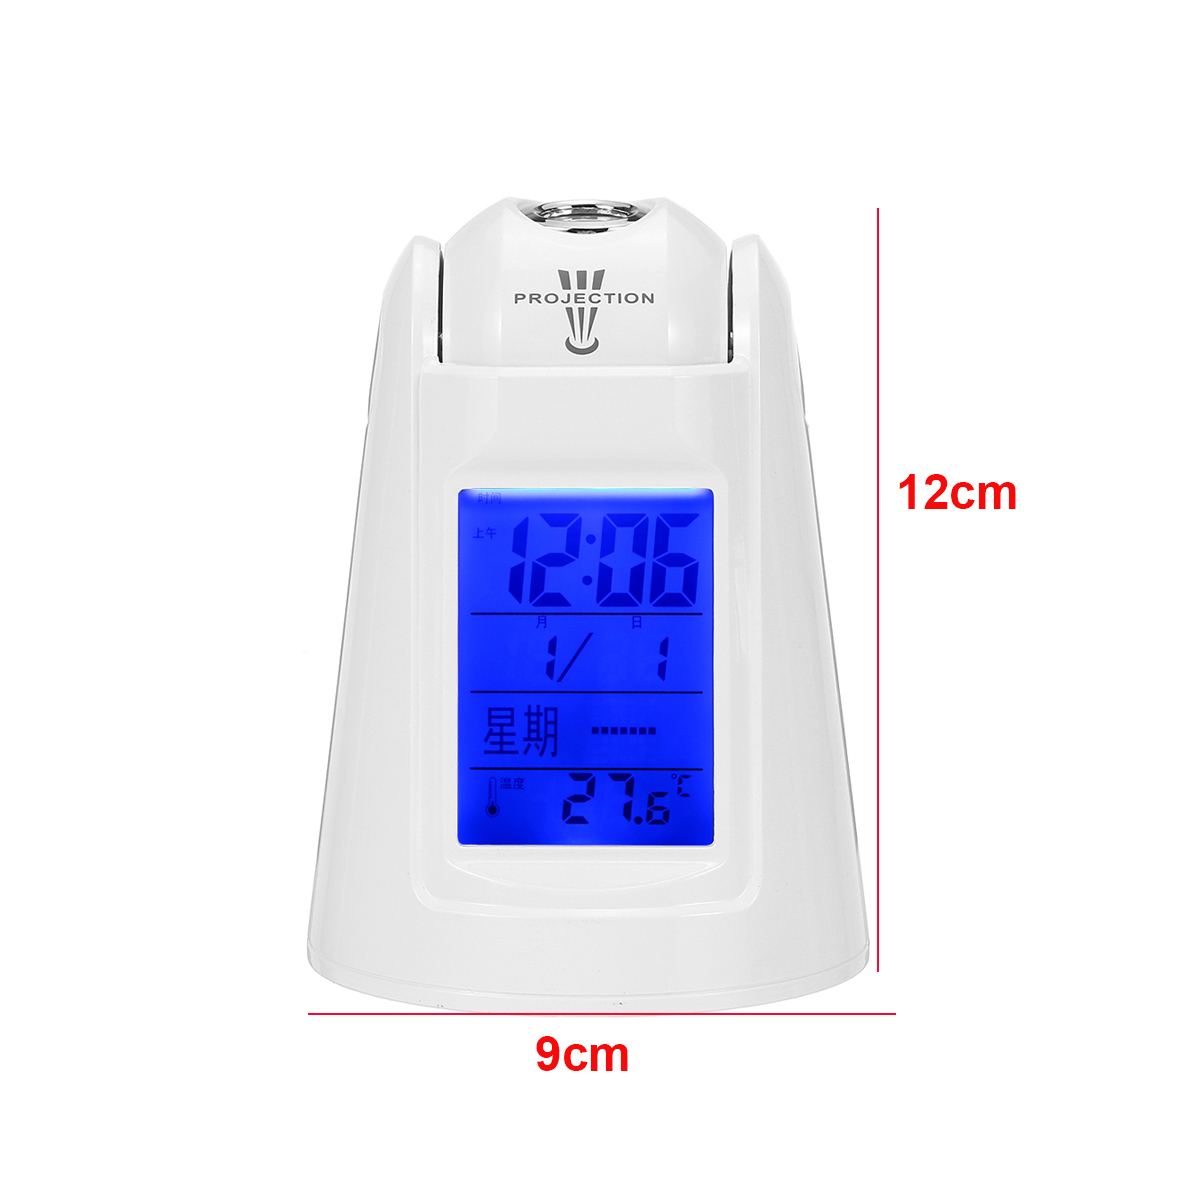 LED-Projection-Alarm-Clock-Thermometer-Snooze-Voice-Timing-Nightlight-Kids-Wake-1709073-3